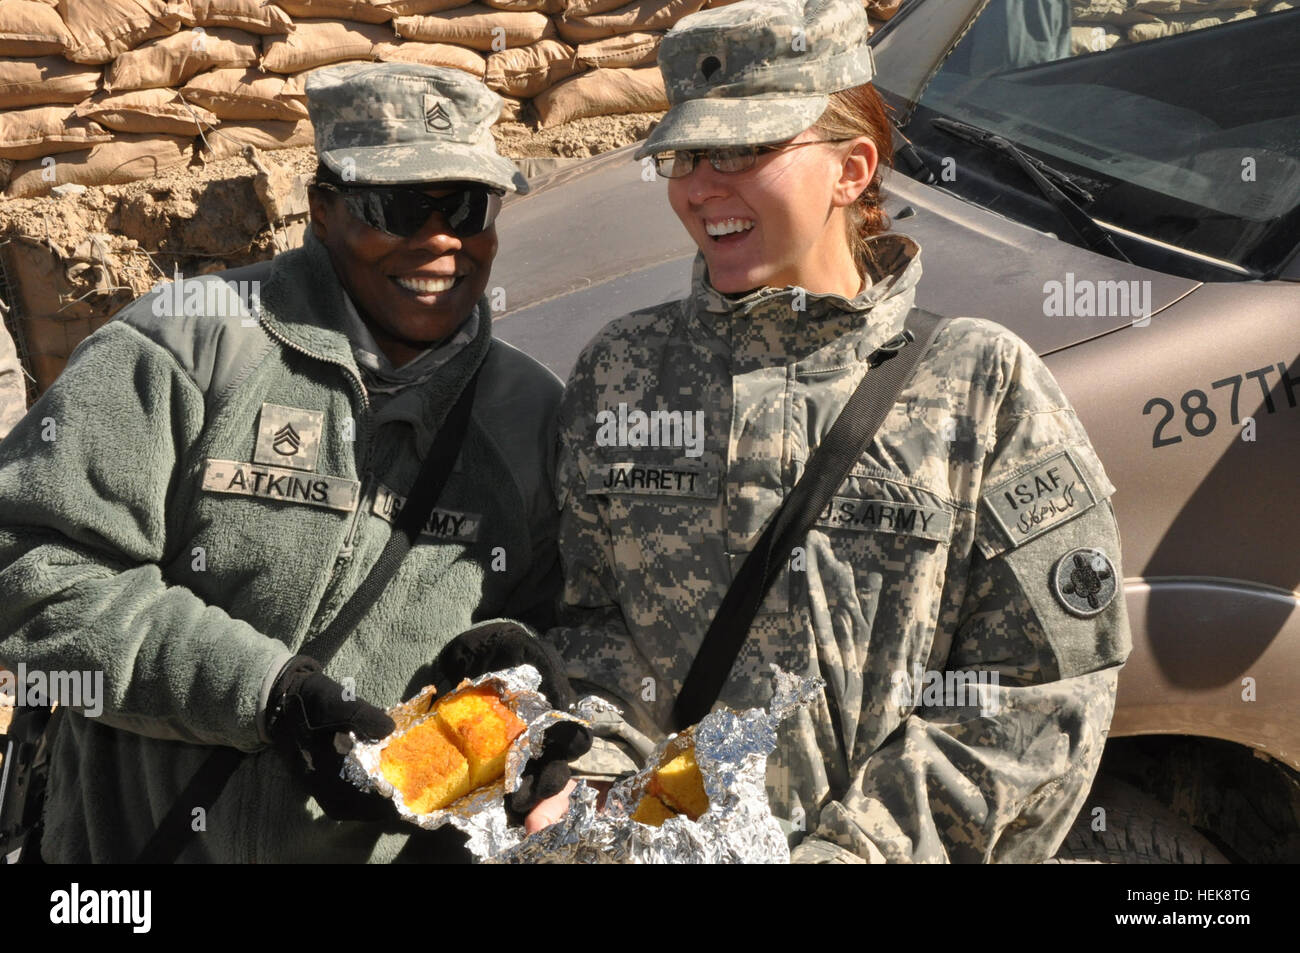 (Left) U.S. Army Staff Sgt. Stephanie B. Atkins and Spc. Stephanie E. Jarrett display freshly baked cornbread during a recent battlefield circulation visit to the 287th Engineer Company stationed at Forward Operating Base Lightning, Paktya province, Afghanistan, on Jan. 26, 2011. Both are members of Joint Sustainment Command - Afghanistan, a Mississippi Army National Guard unit, assigned to Kandahar Airfield, Afghanistan. The 287th is a Mississippi Army National Guard based out of Lucedale, Miss., and has deployed since May in search of roadside bombs in southeastern Afghanistan. Mississippi A Stock Photo